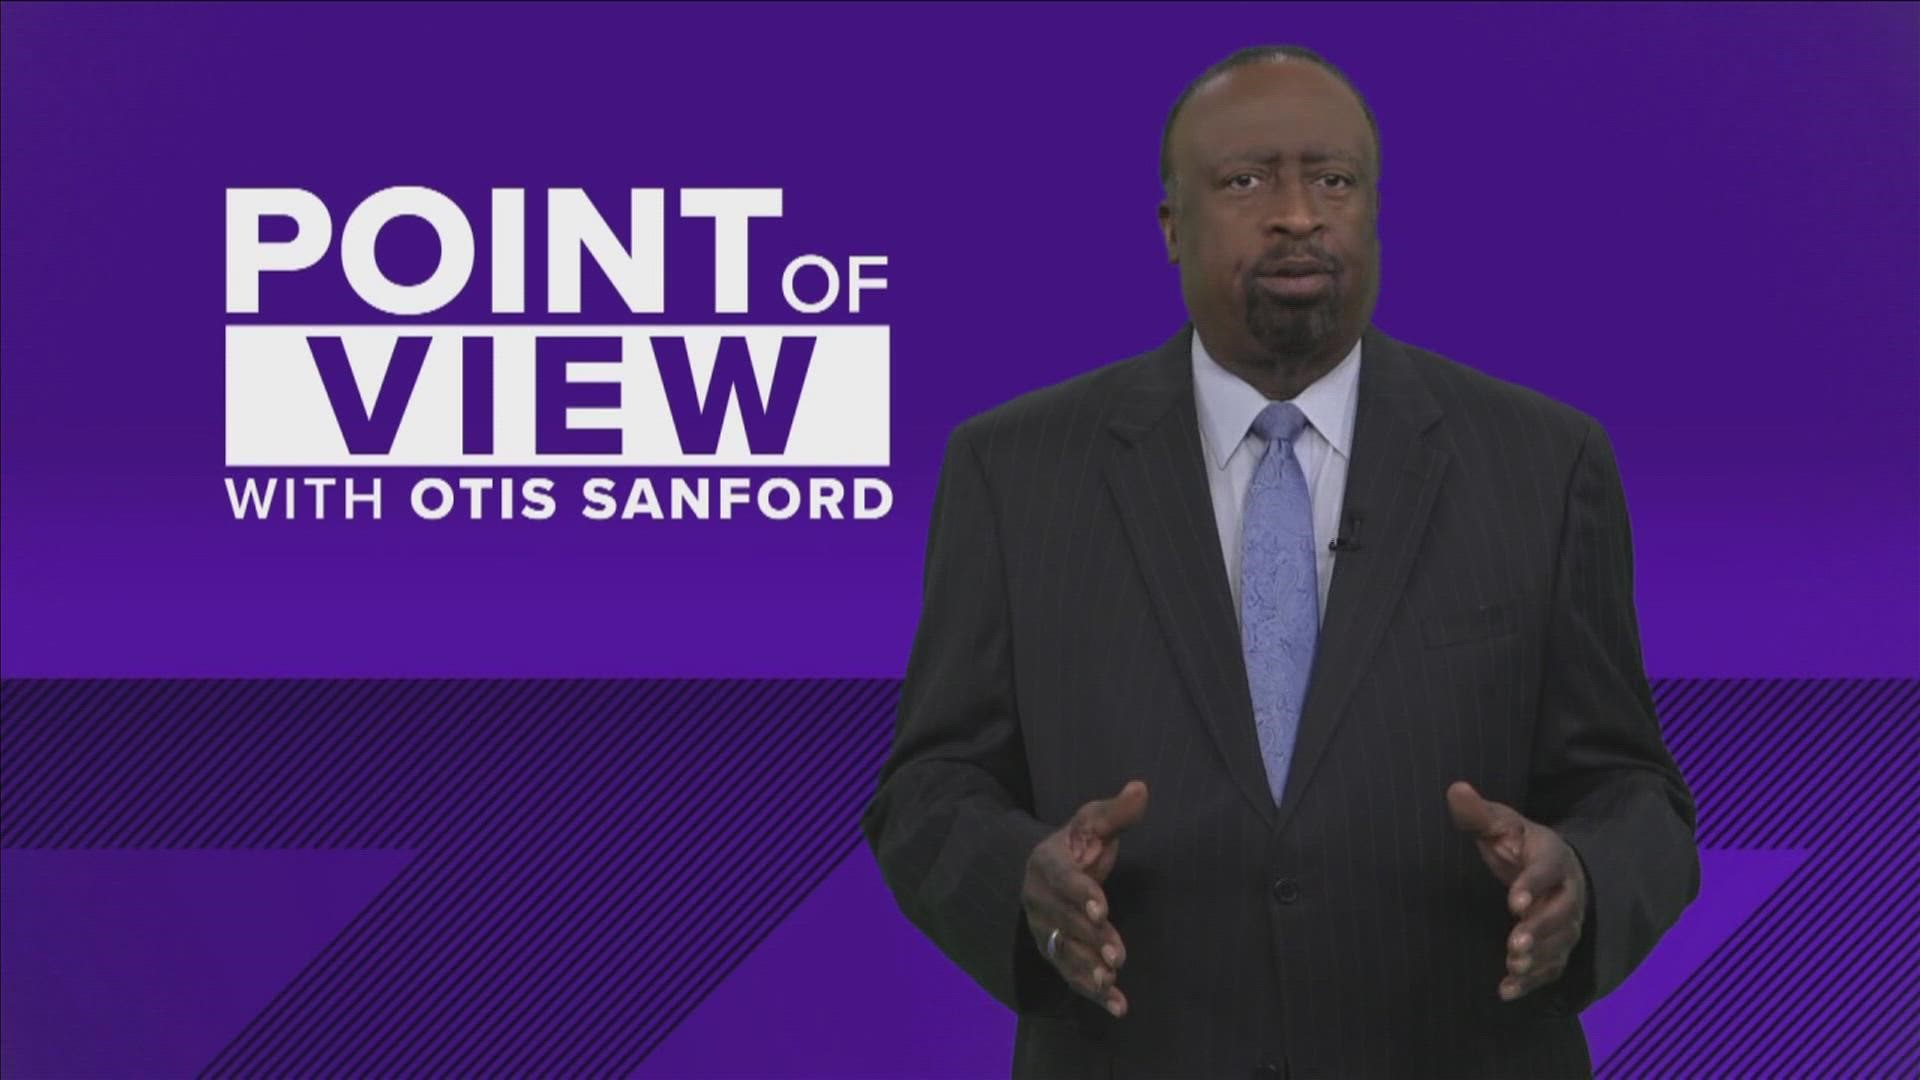 ABC24 political analyst and commentator Otis Sanford shared his point of view on the race in 2023 for Memphis mayor.